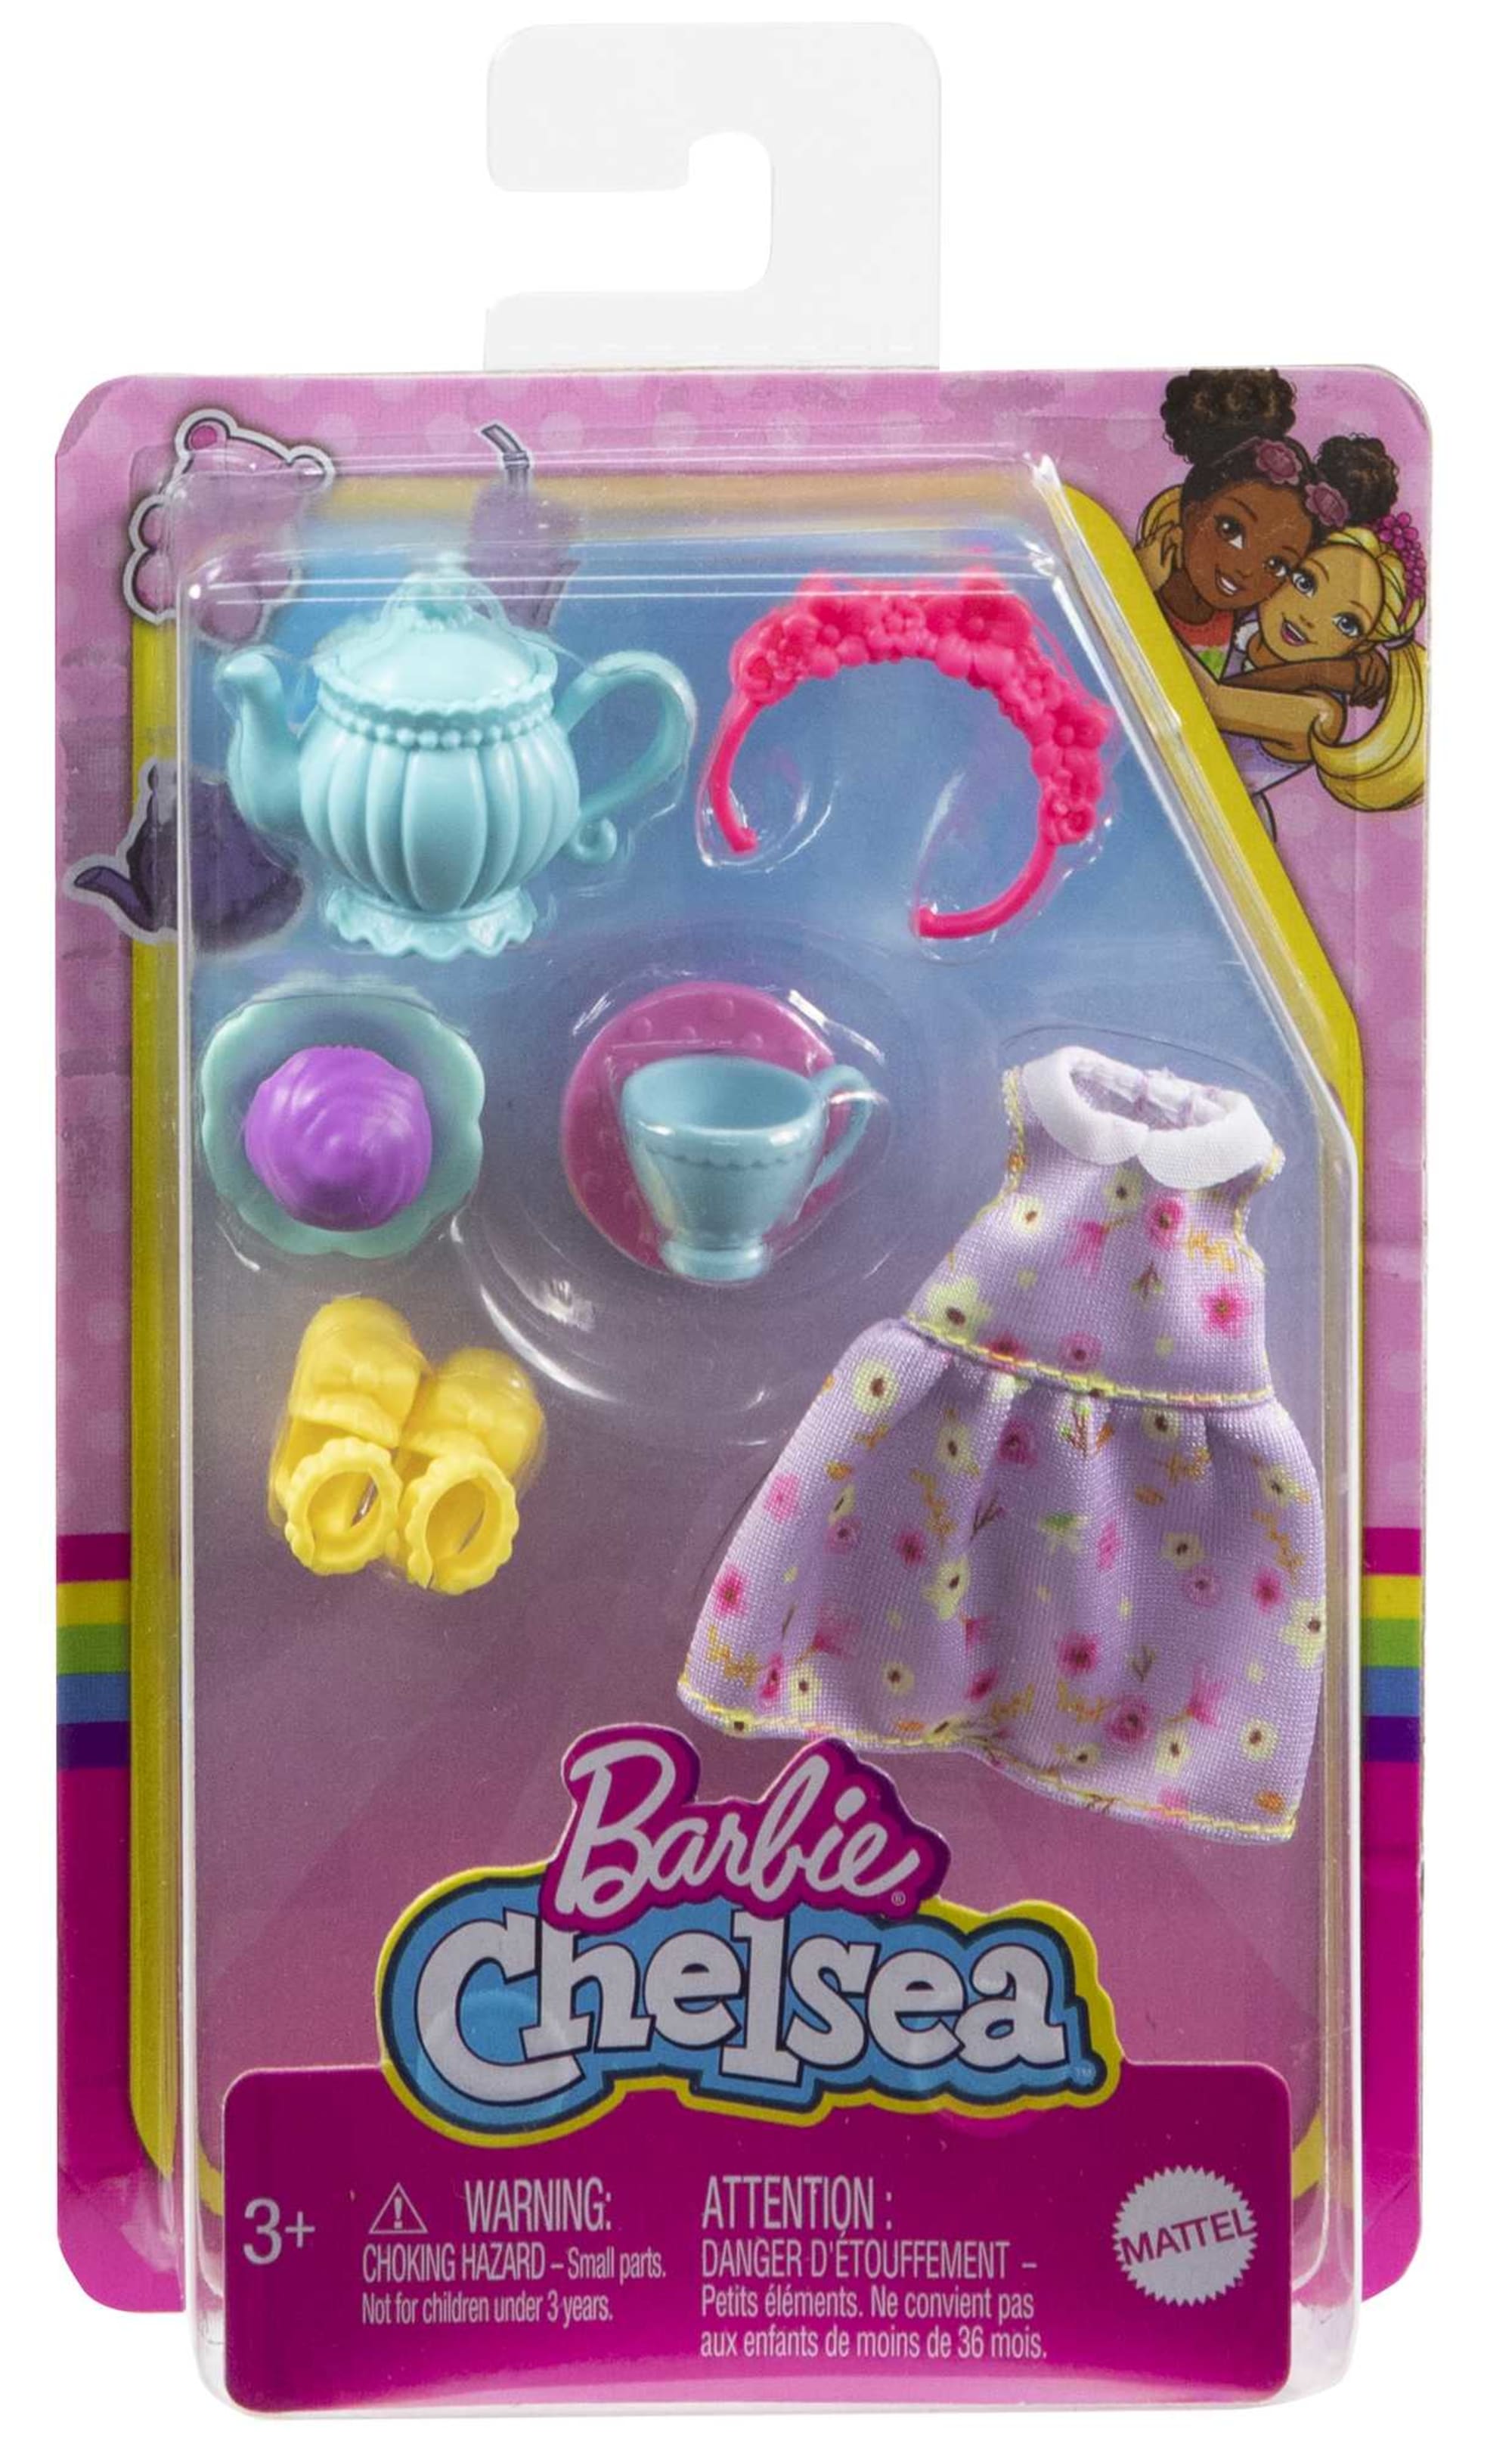  Barbie Accessory Pack, 4 Pieces, with Barbecue Accessories, for  3 to 7 Year Olds : Toys & Games